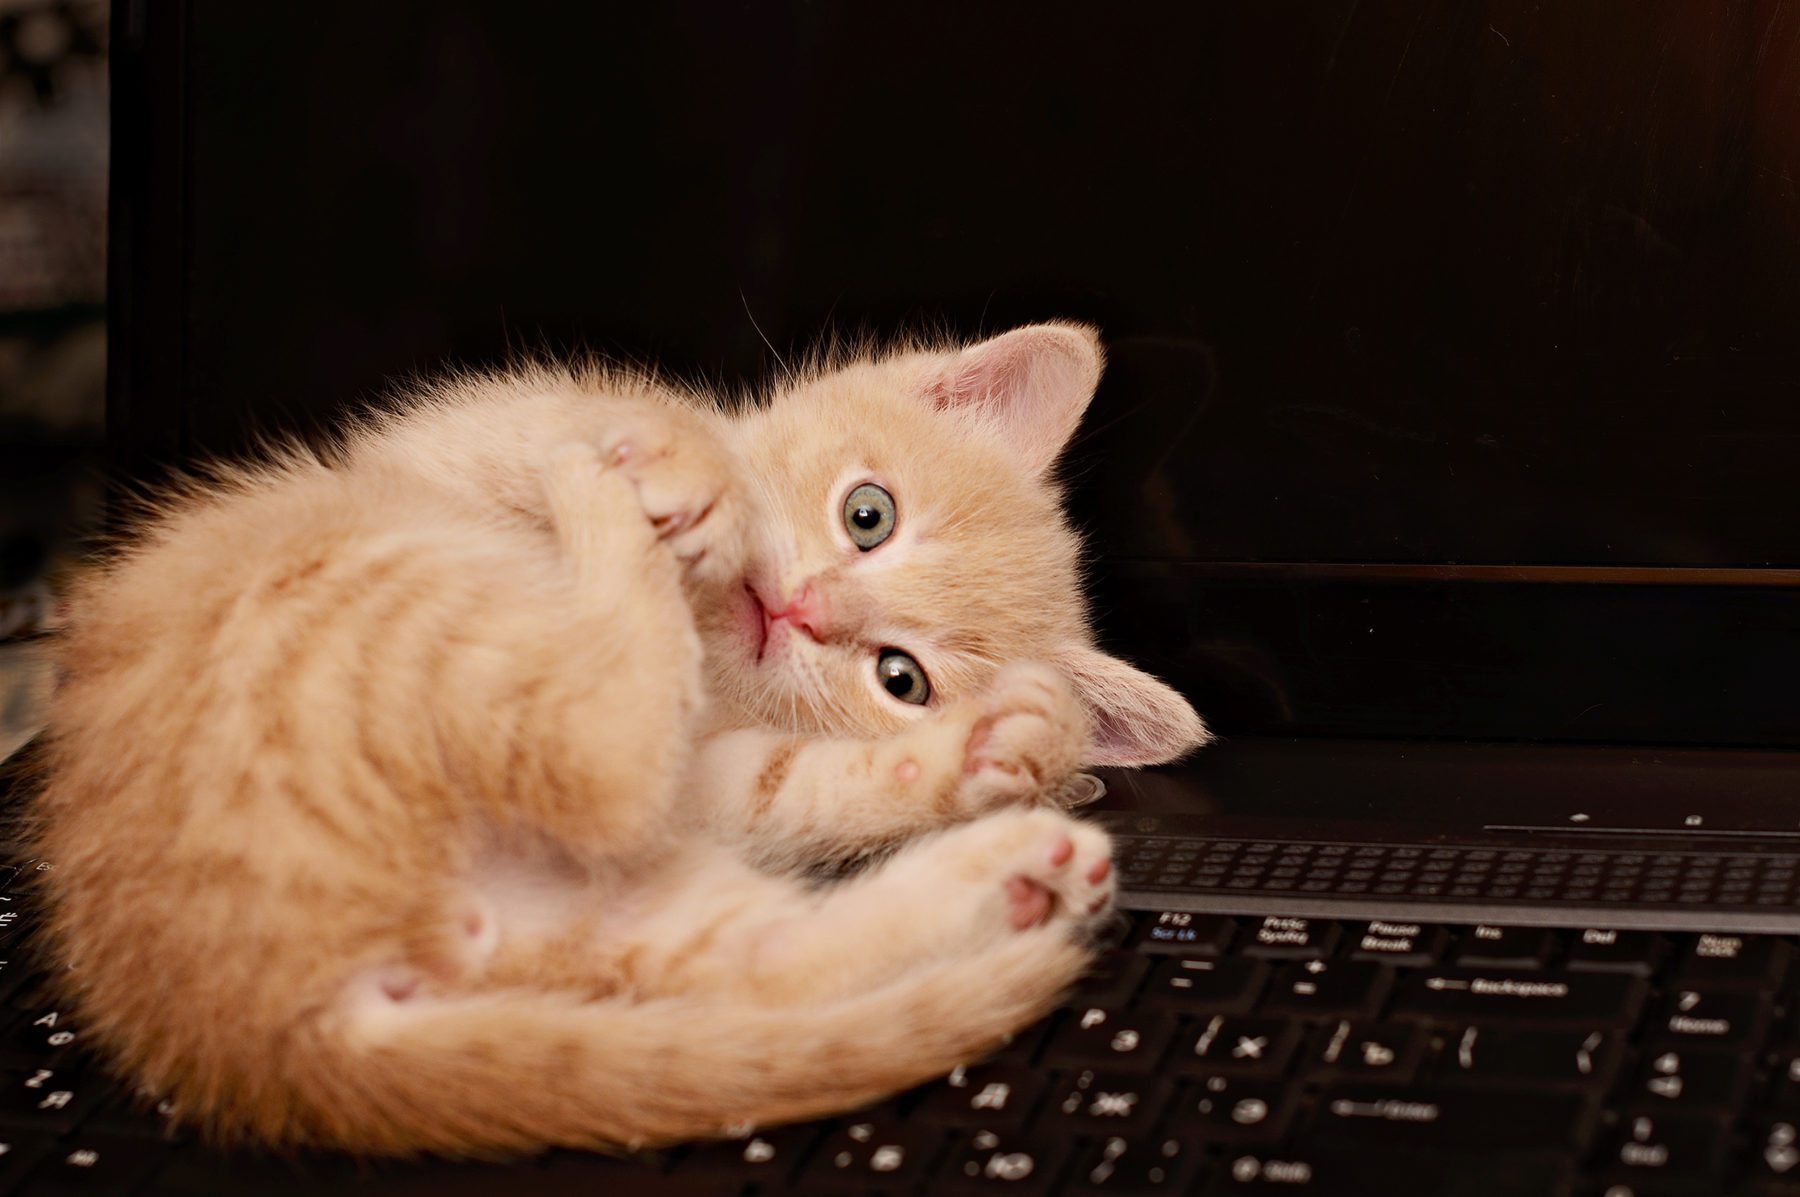 Can Cat Videos Make You A Nicer, Healthier Person?